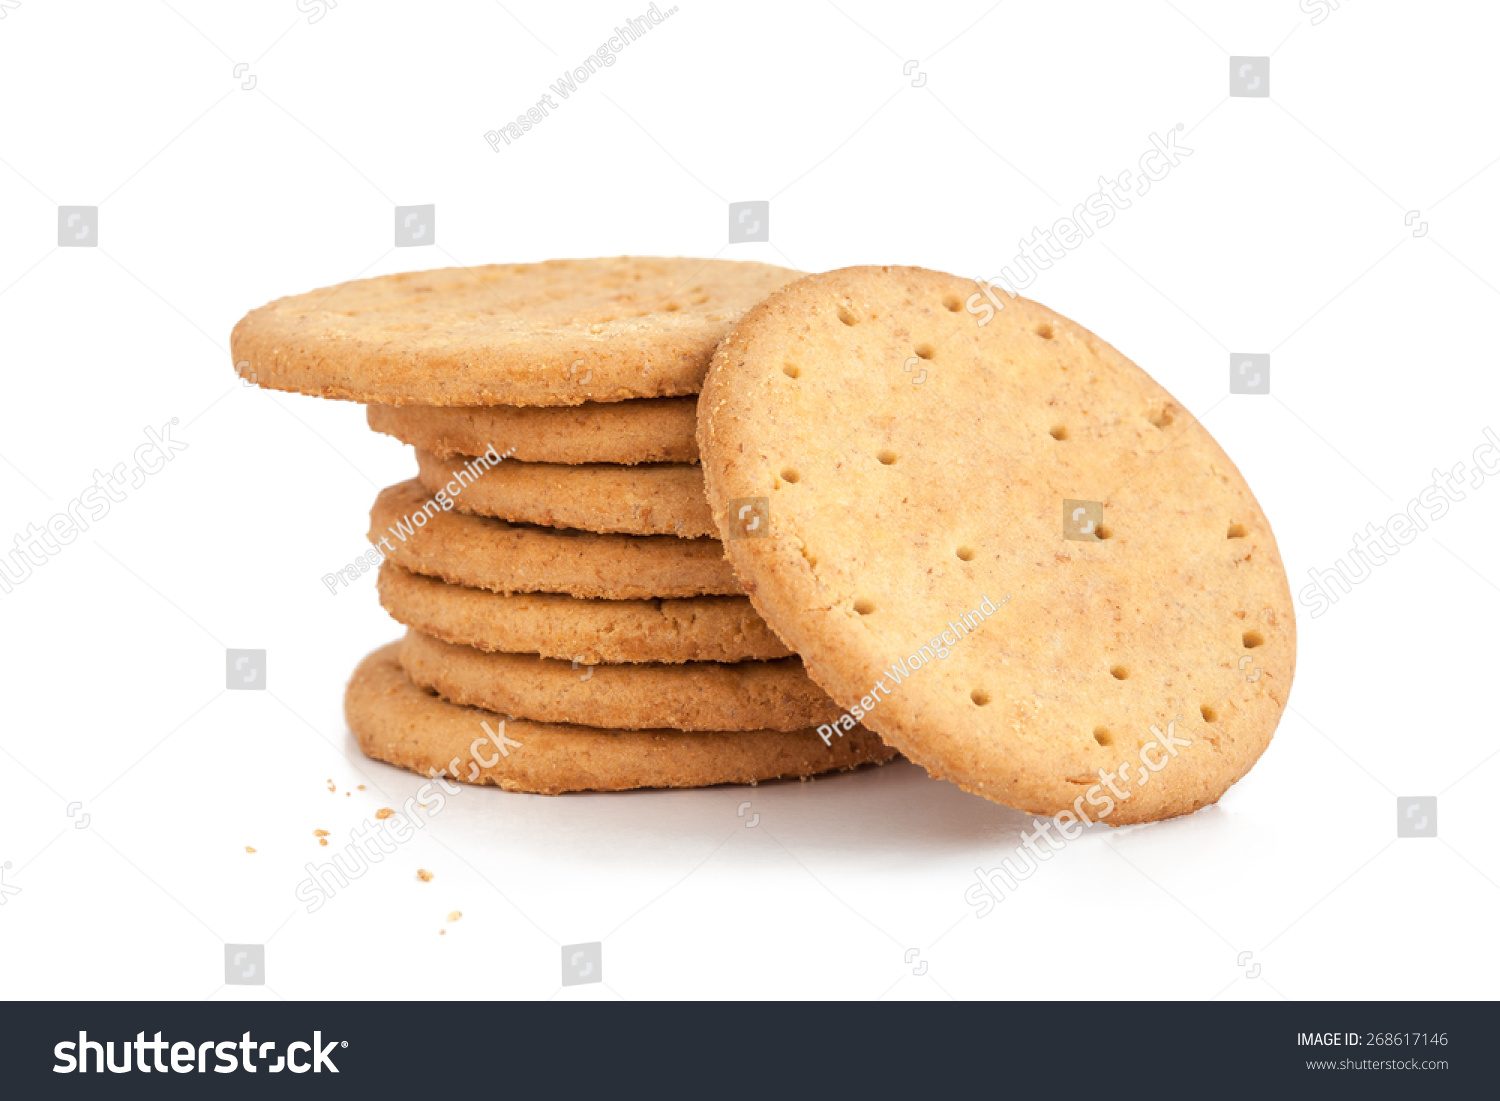 BISCUITS - A stack of delicious wheat round biscuits with a few crumbs isolated on white #268617146